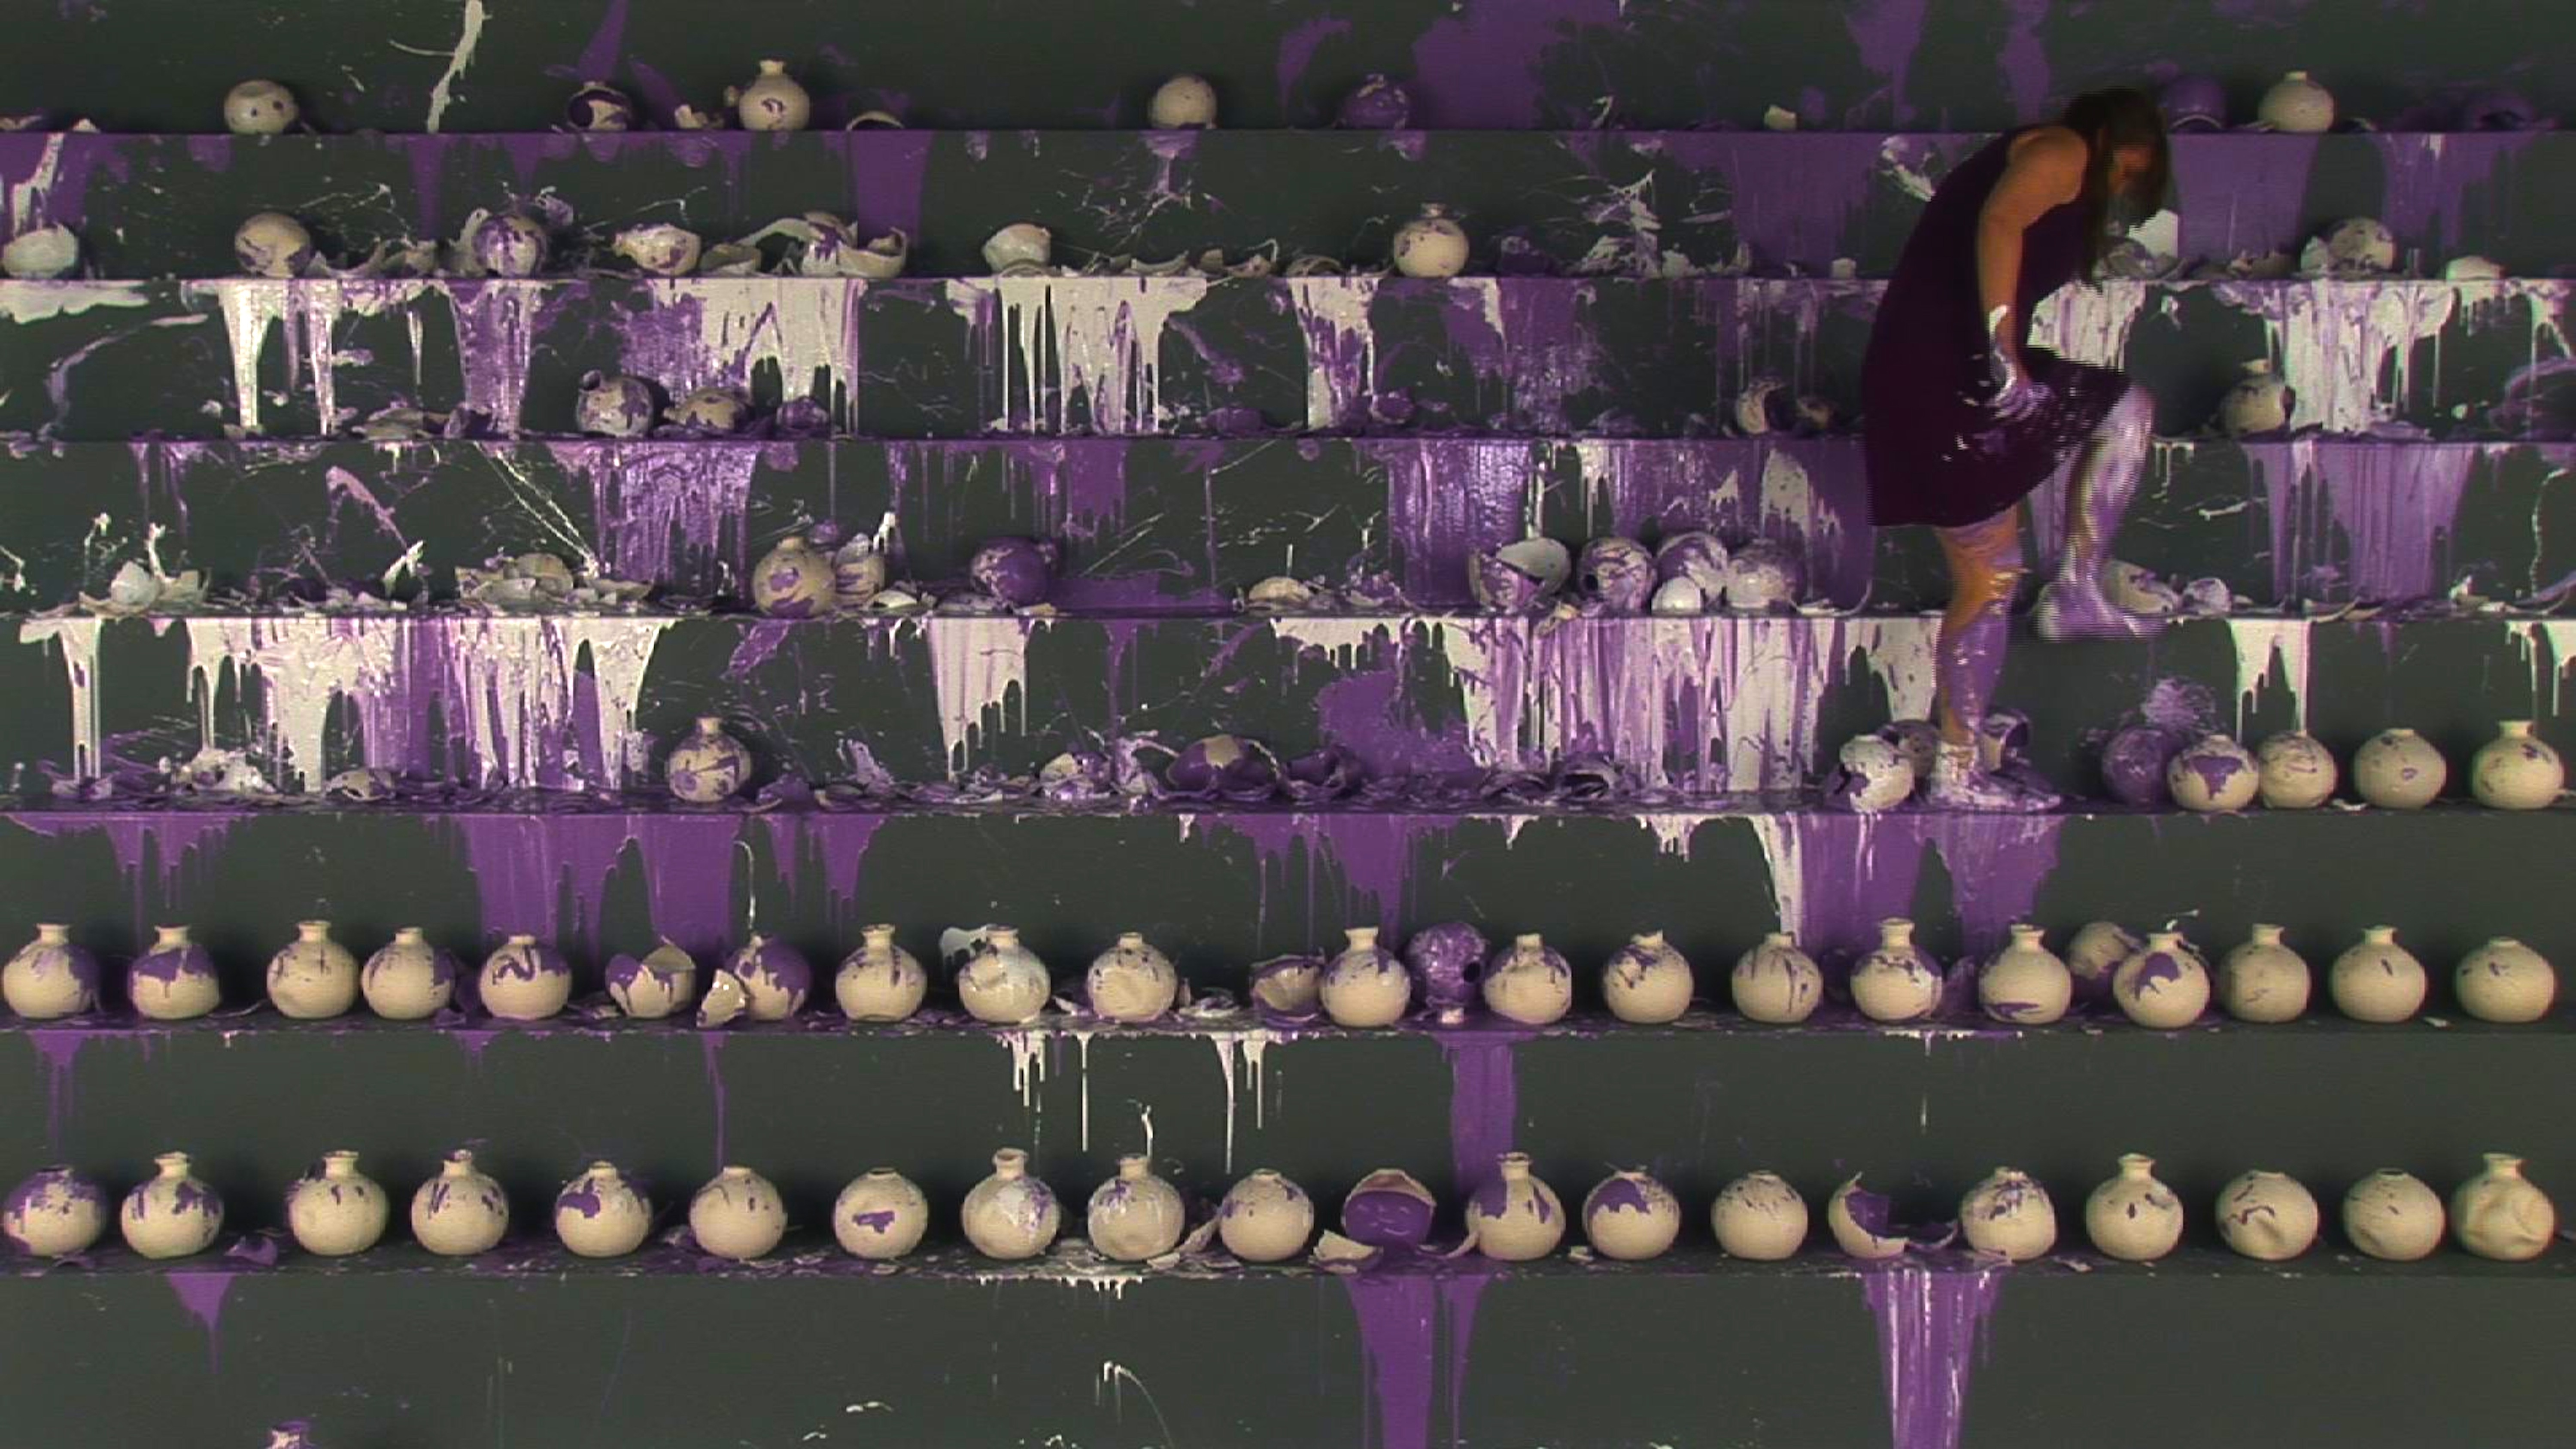 Artist stomping and breaking clay jars of white and purple paint